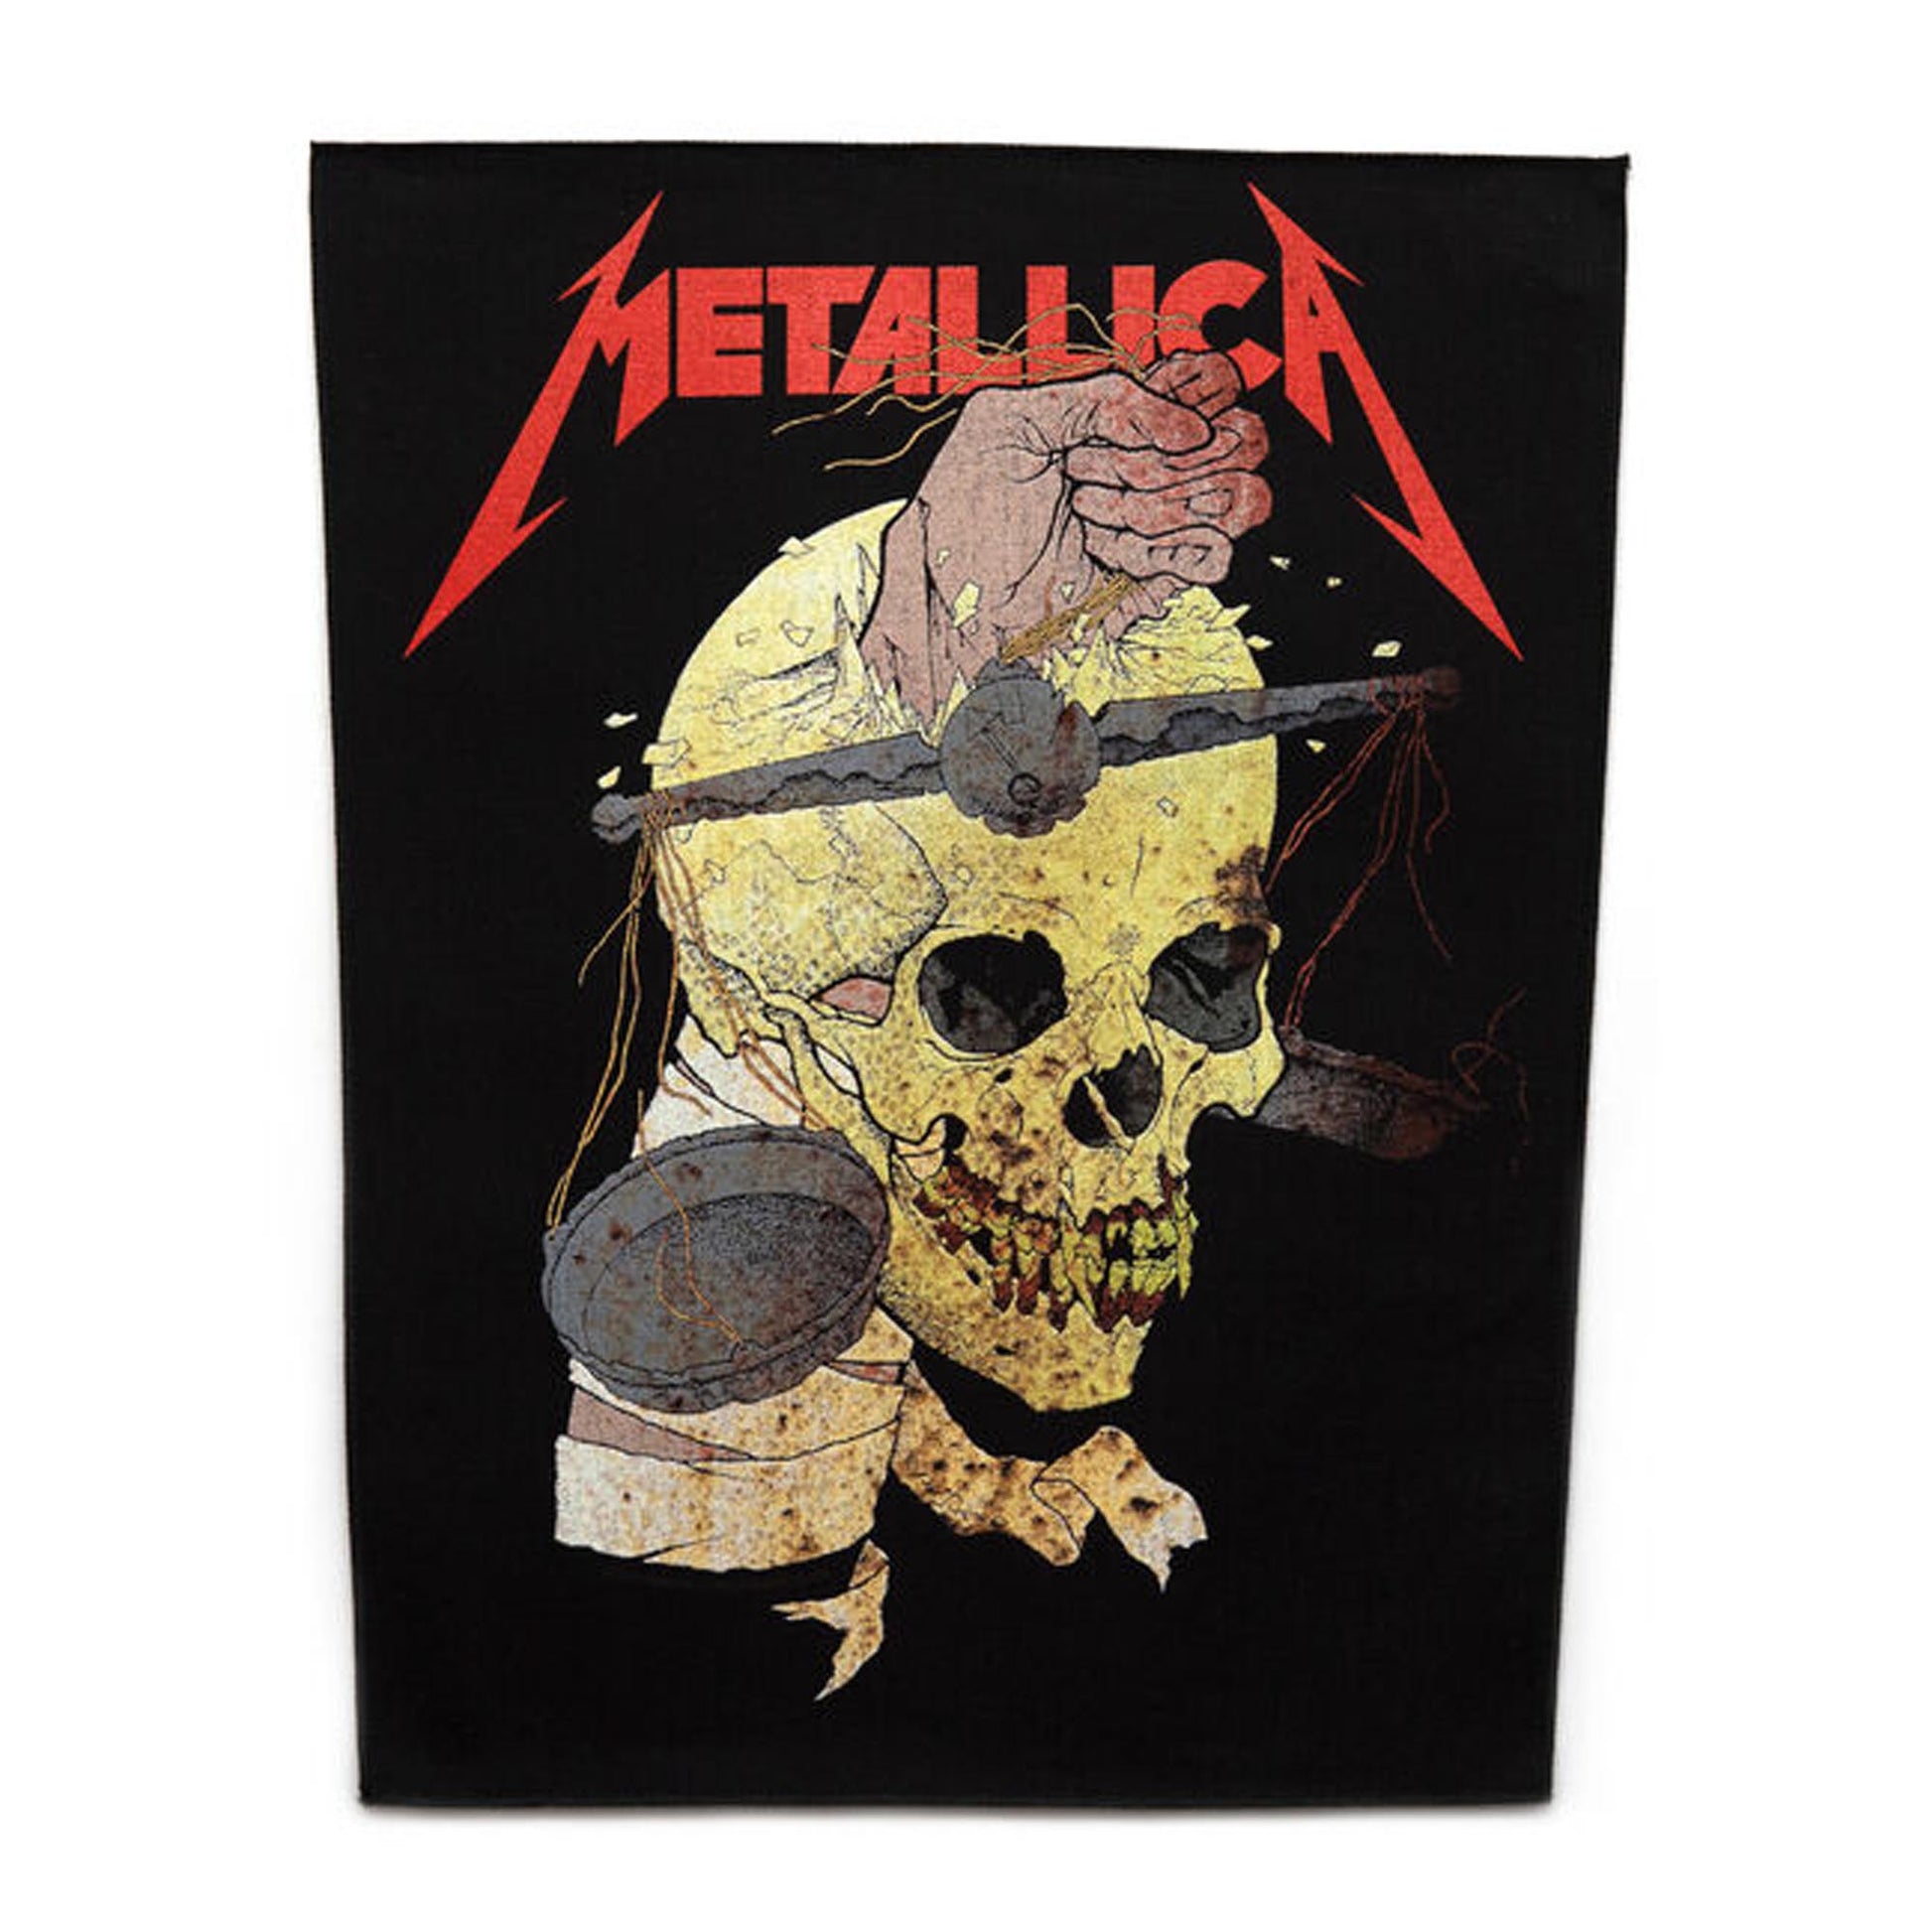 Metallica 'Harvester Of Sorrow' Back Of Jacket Patch Black Woven Sew On Patch 